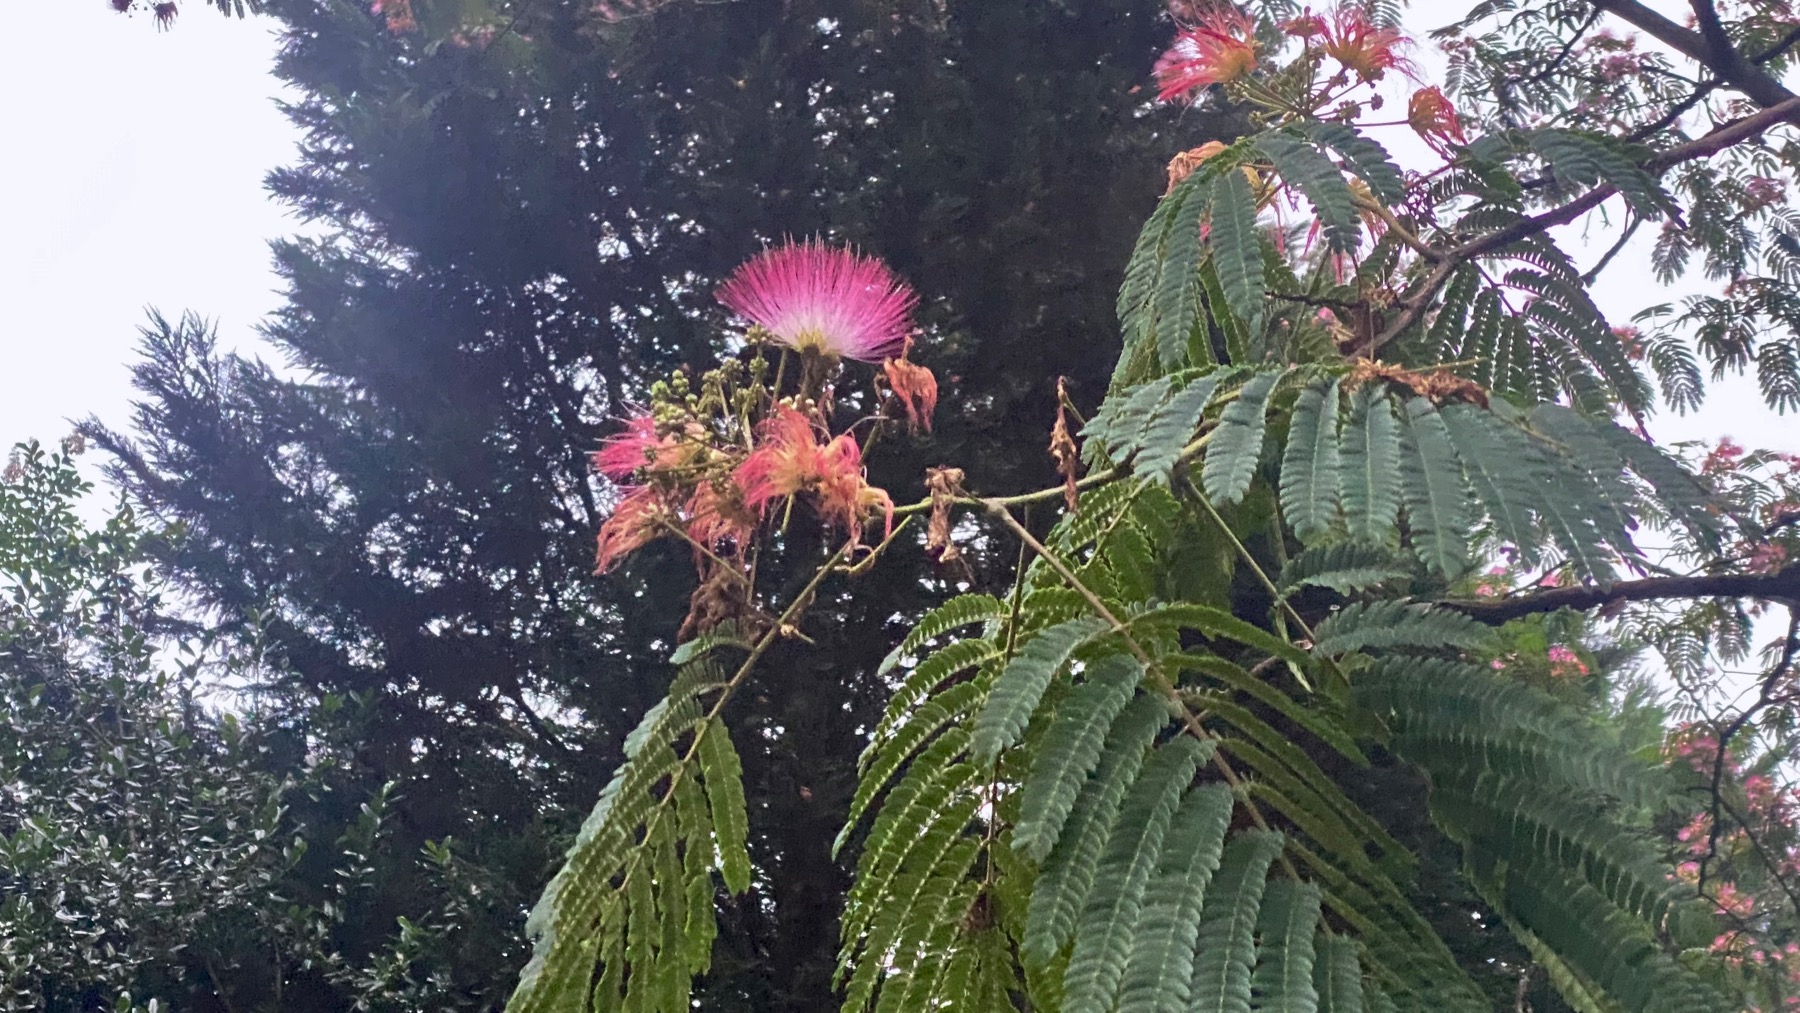 Mimosa blooms